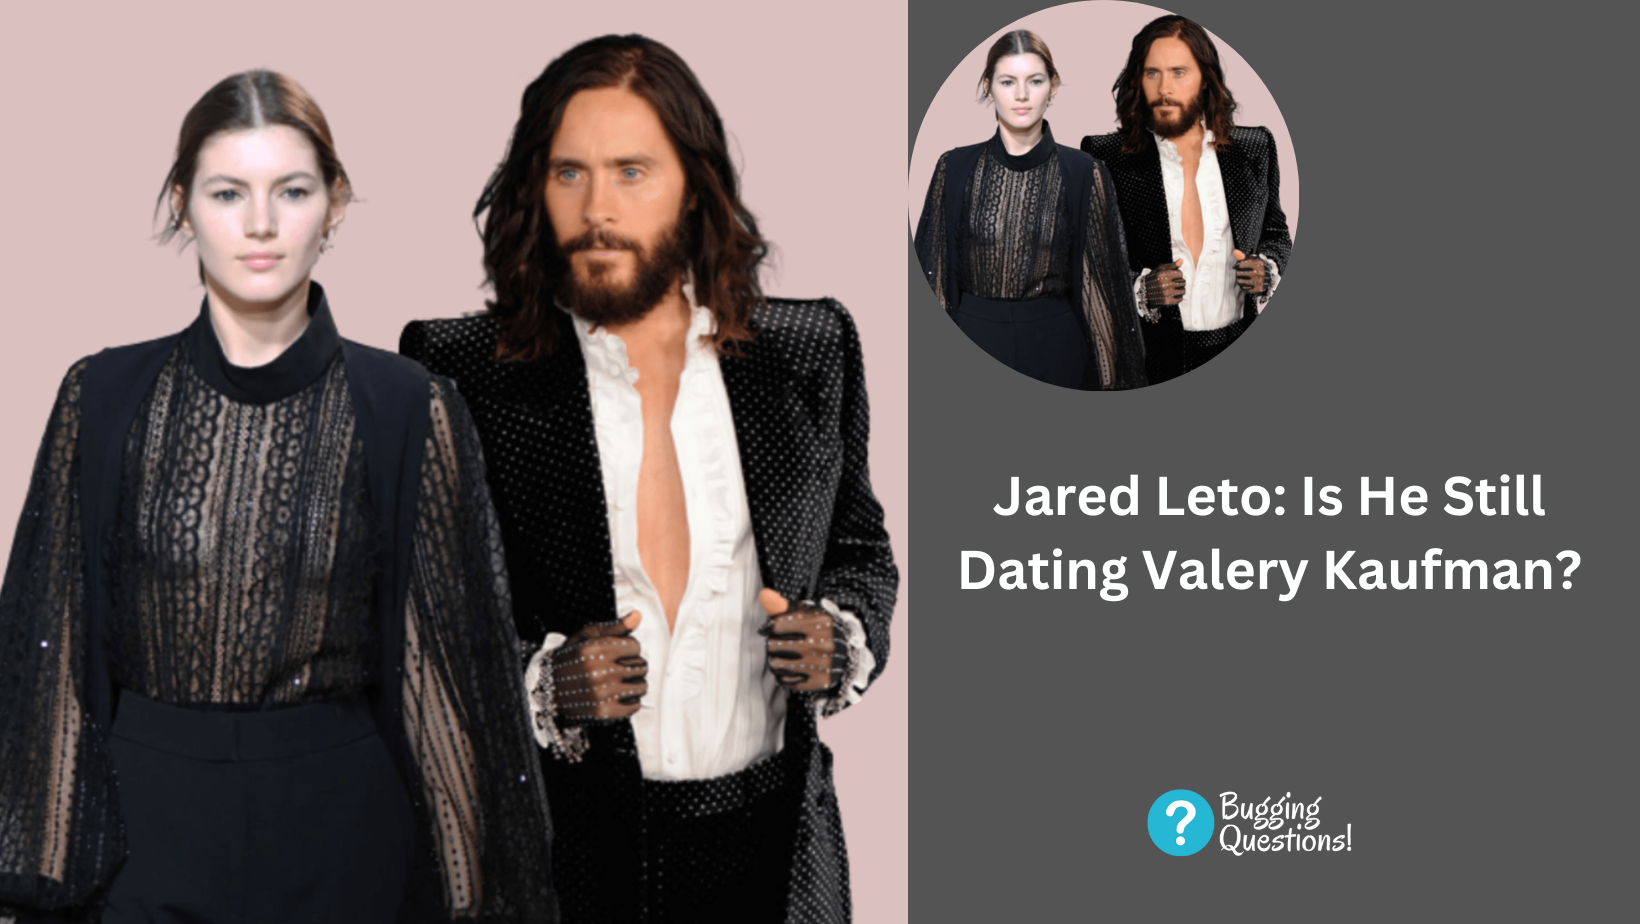 Jared Leto: Is He Still Dating Valery Kaufman?